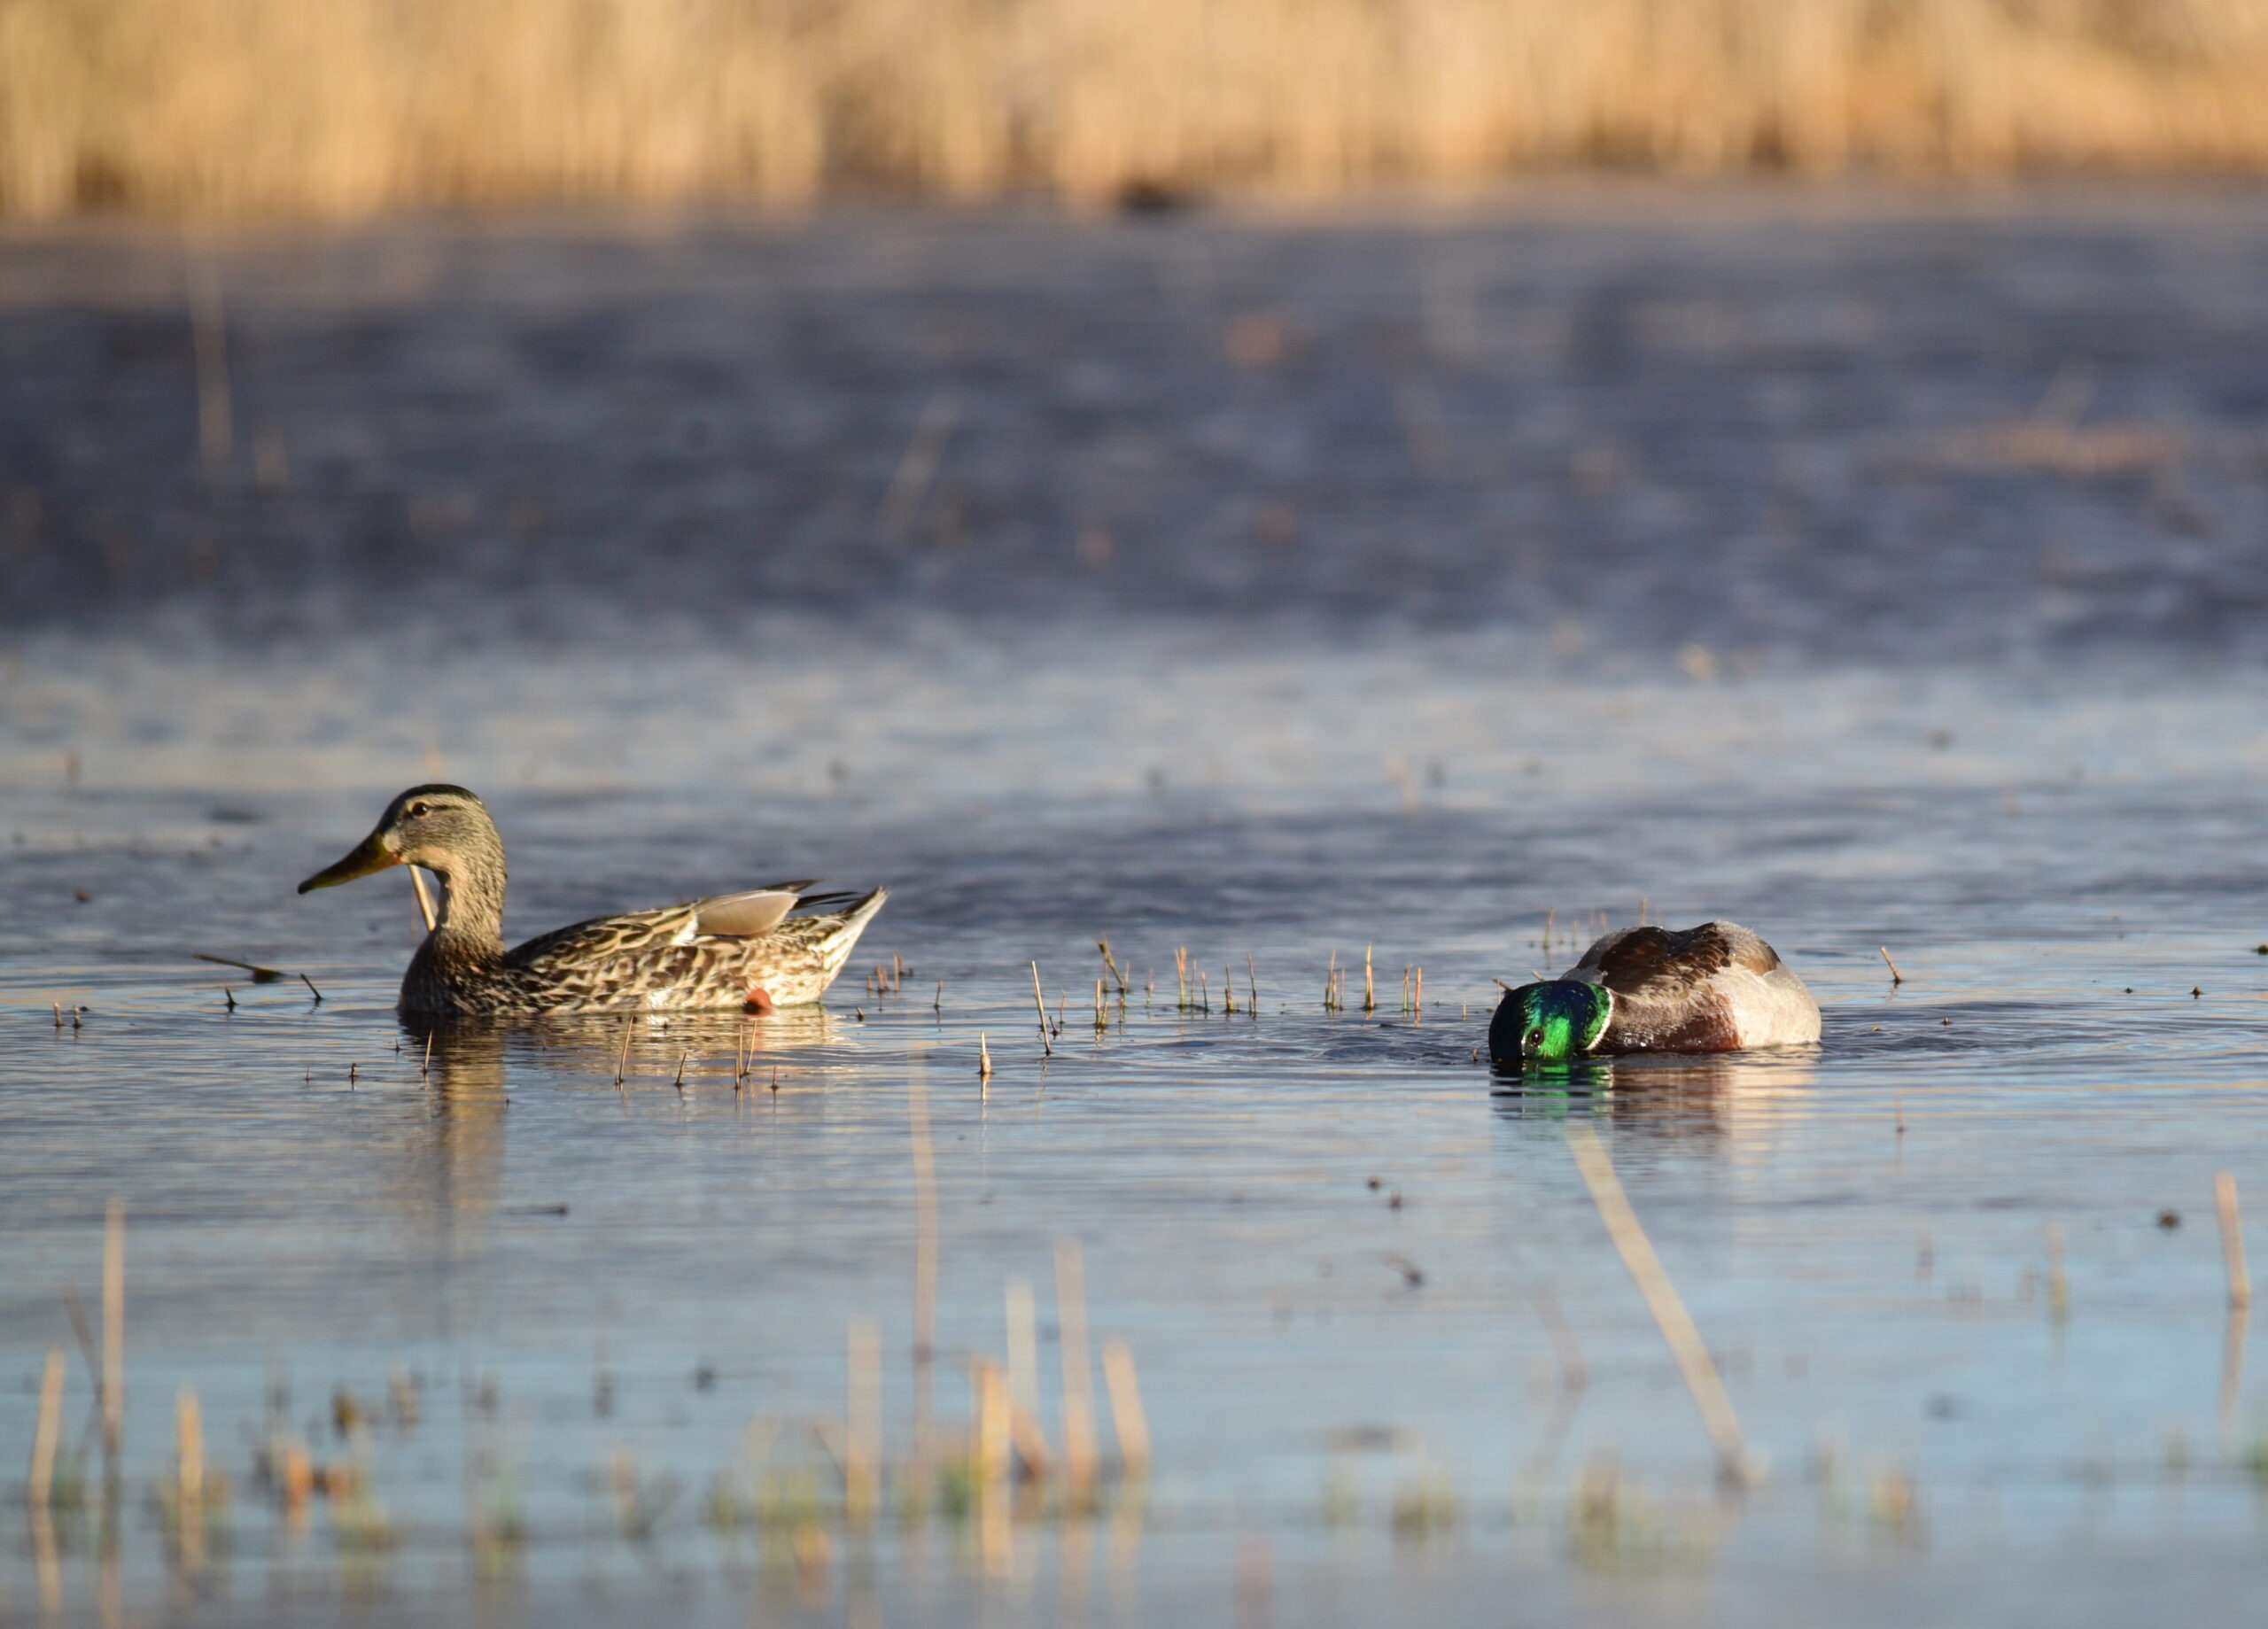 Mallard numbers were lower than the last survey count